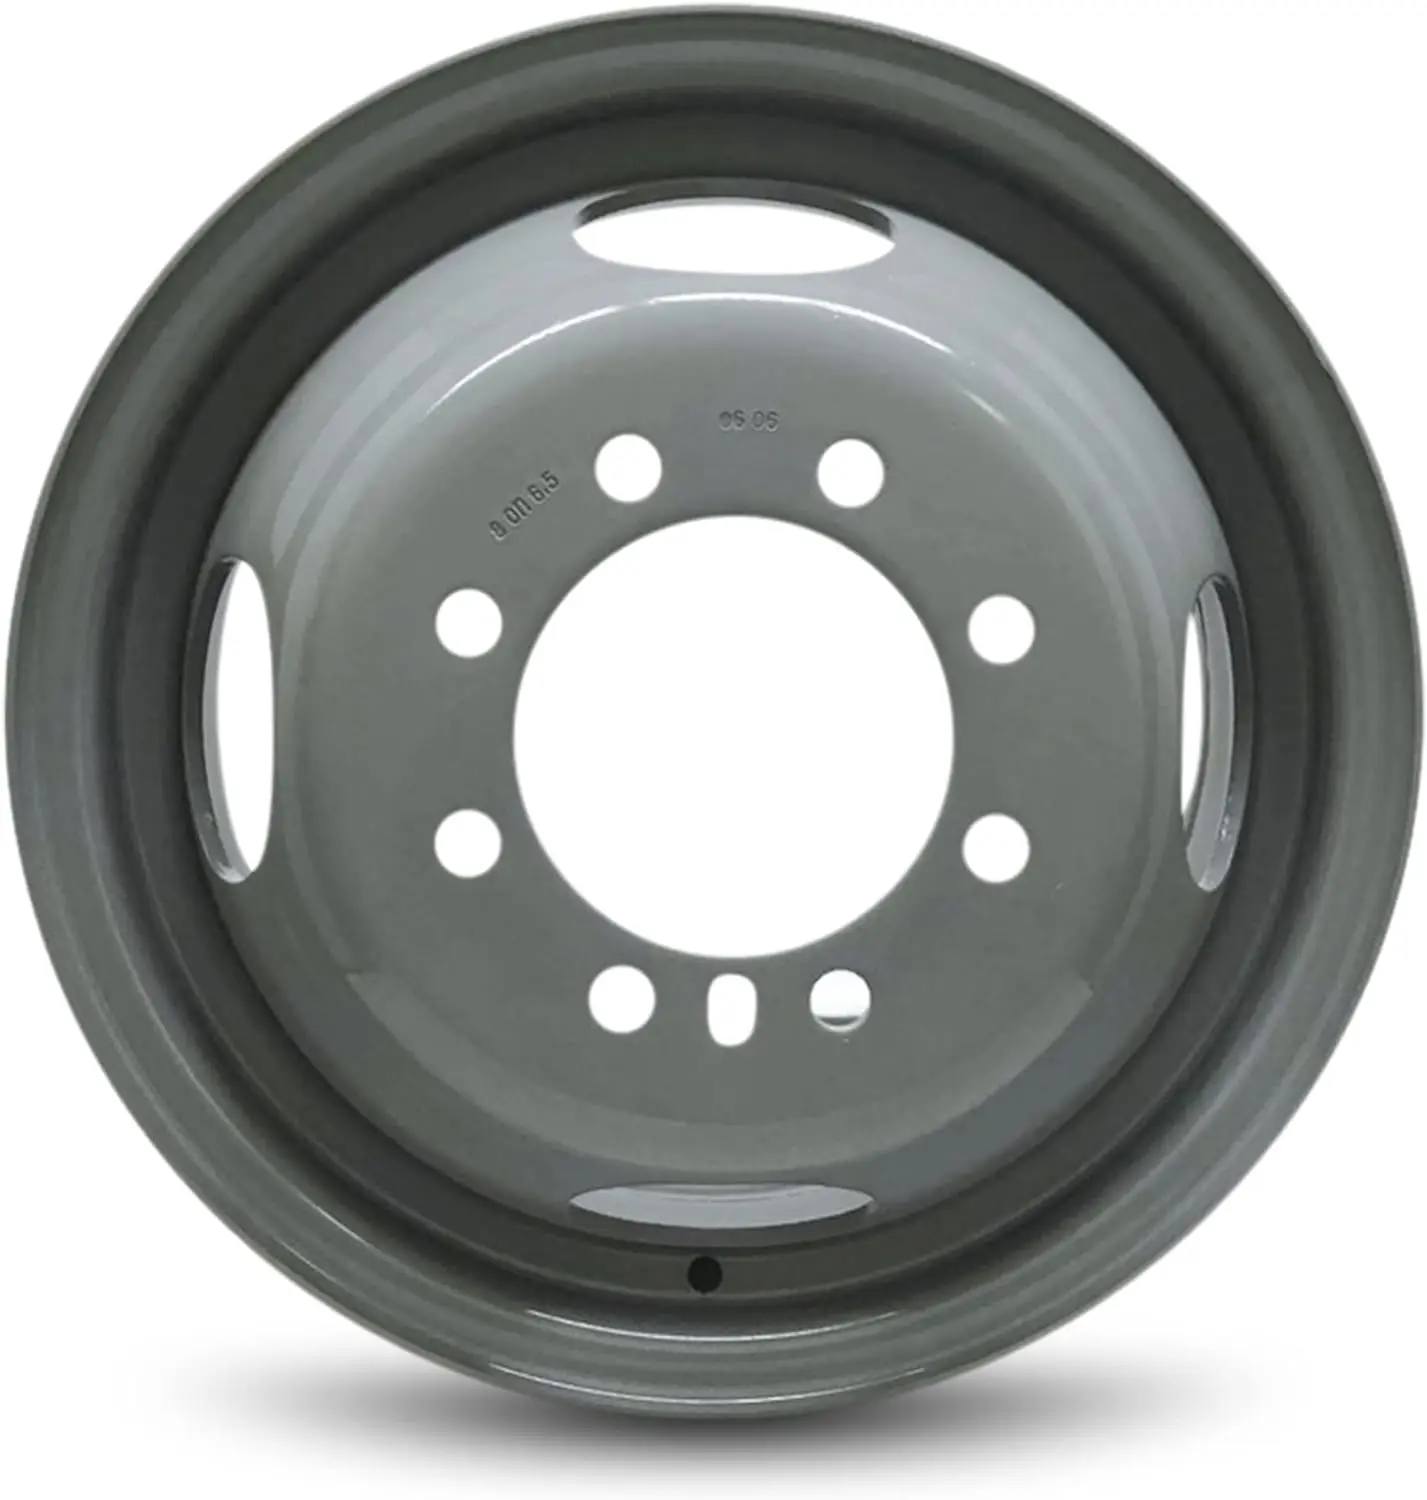 For 94-99 Dodge Ram 3500 16 Inch Gray Steel Rim - OE Direct Replacement - Road Ready Car Wheel